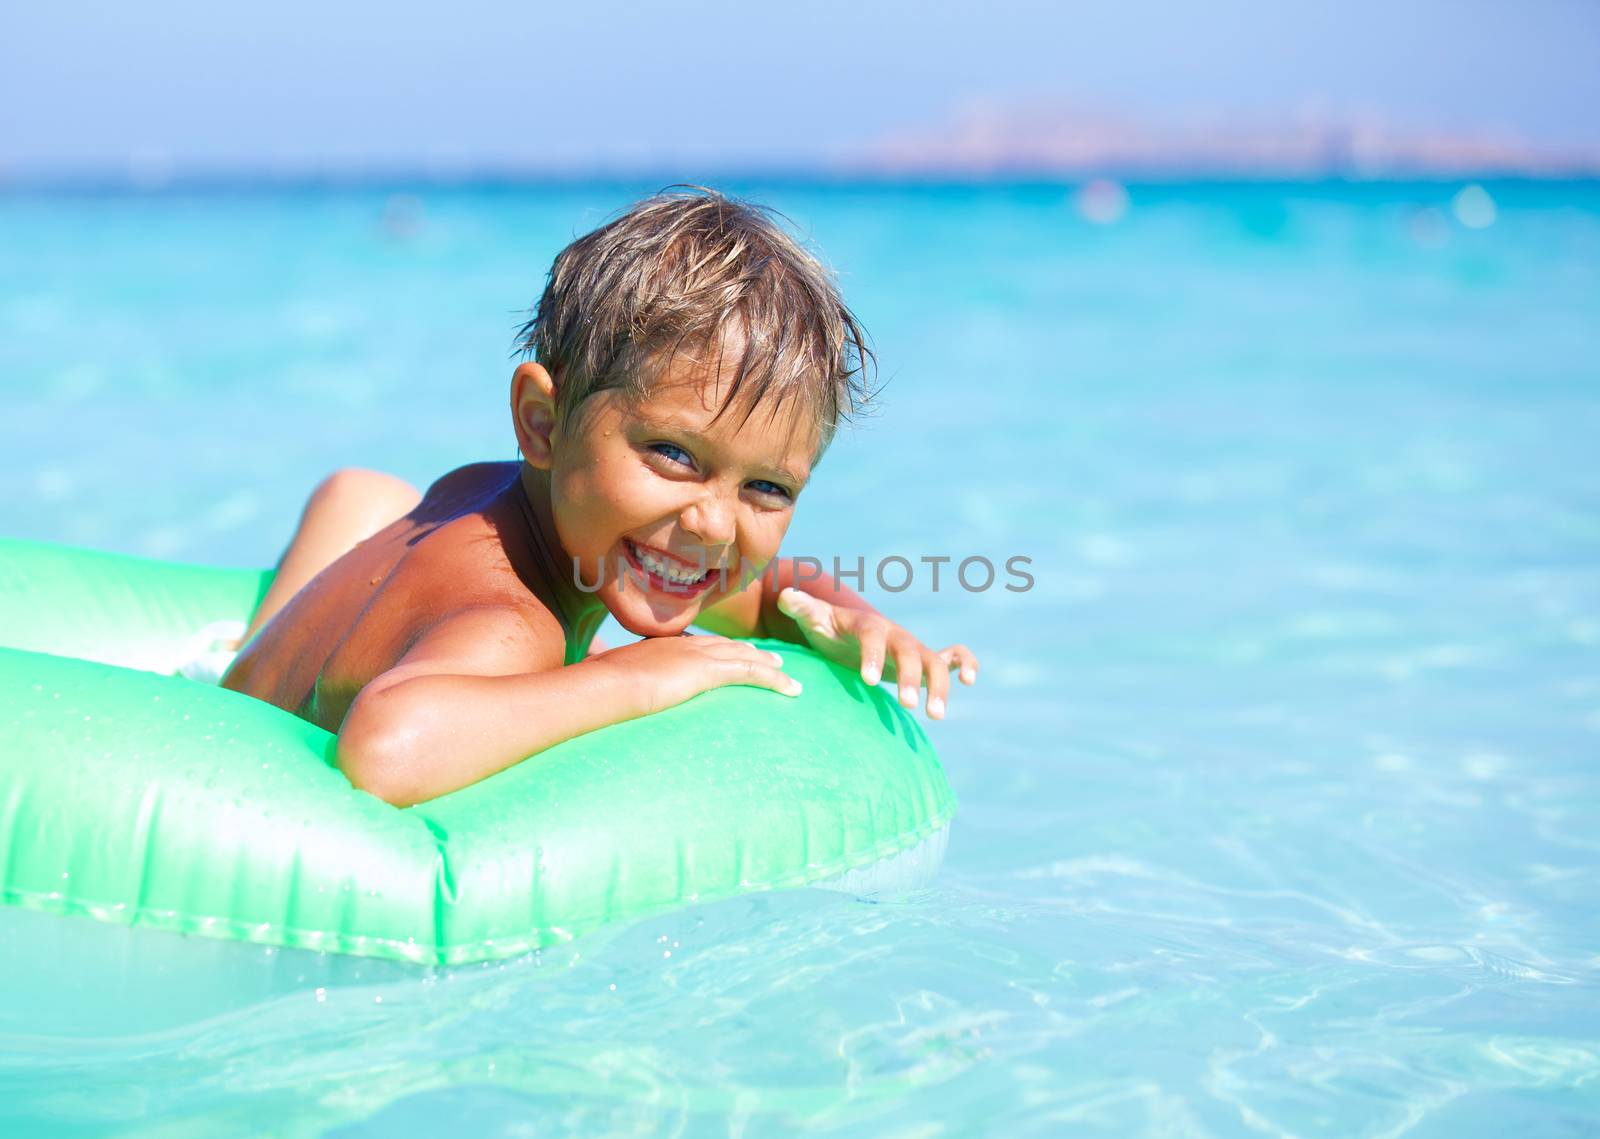 Happyboy playing on the inflatable rubber circle in the sea